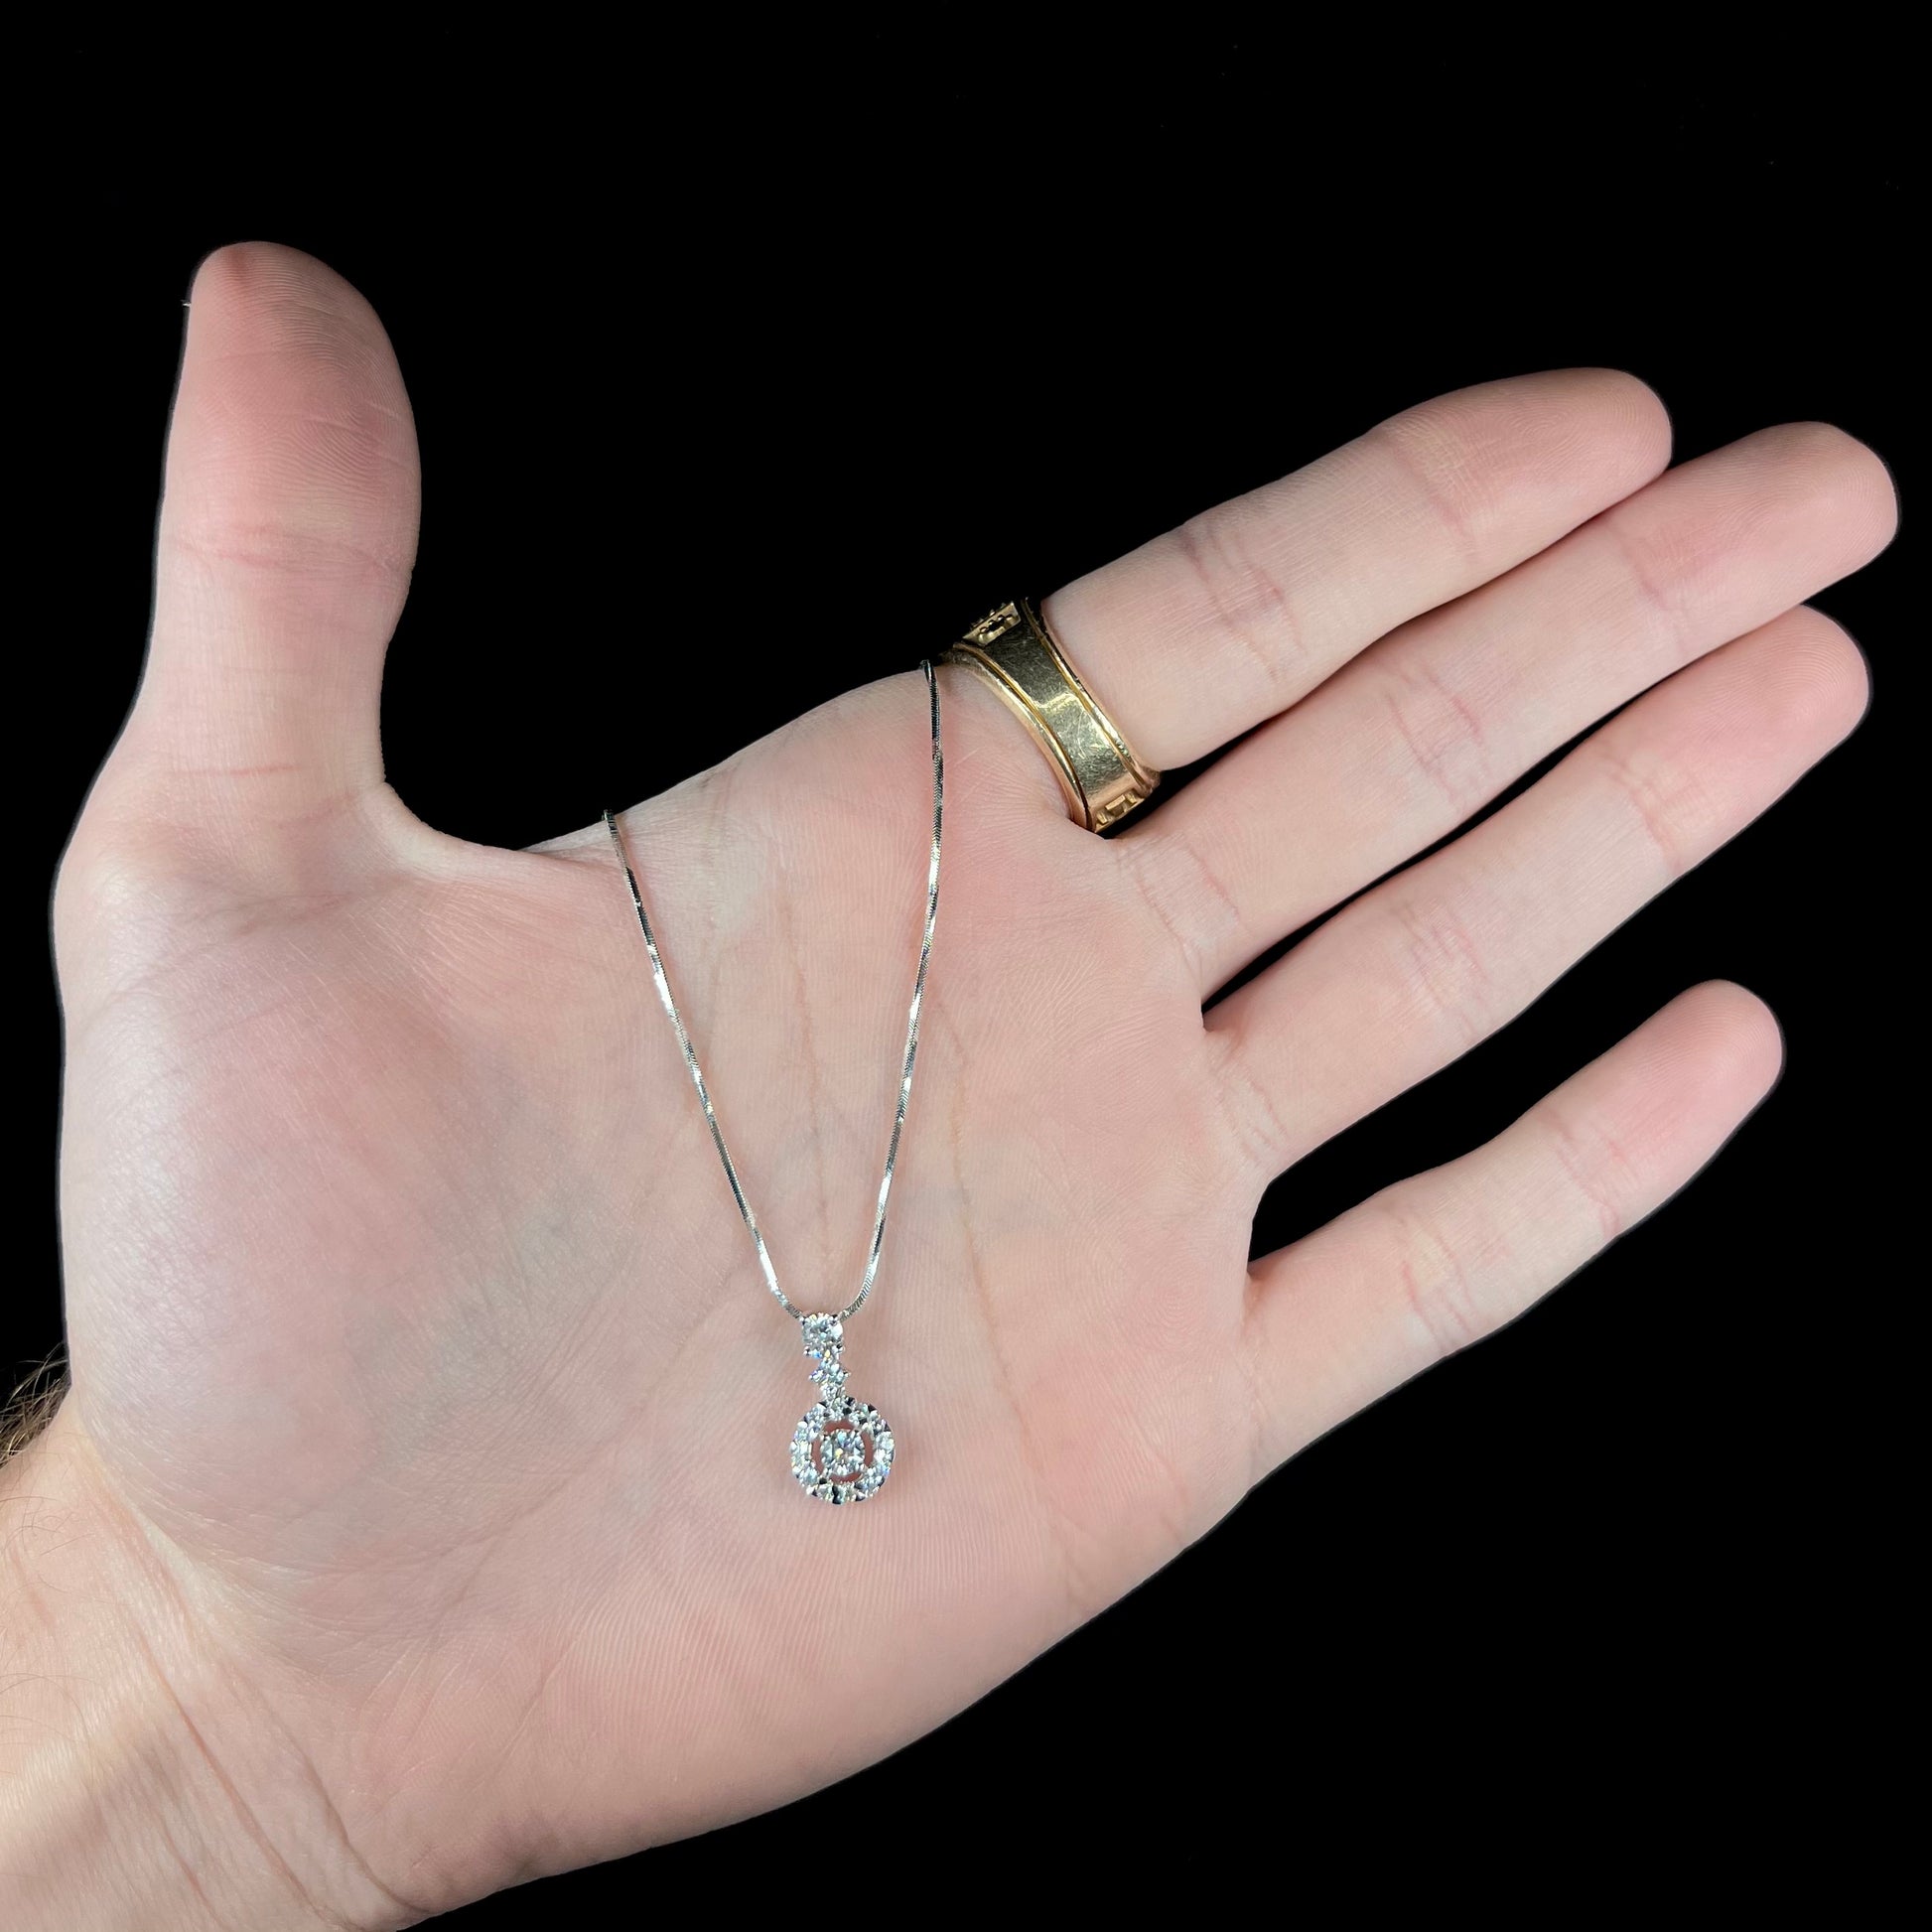 A ladies' diamond halo necklace with snake chain cast in platinum.